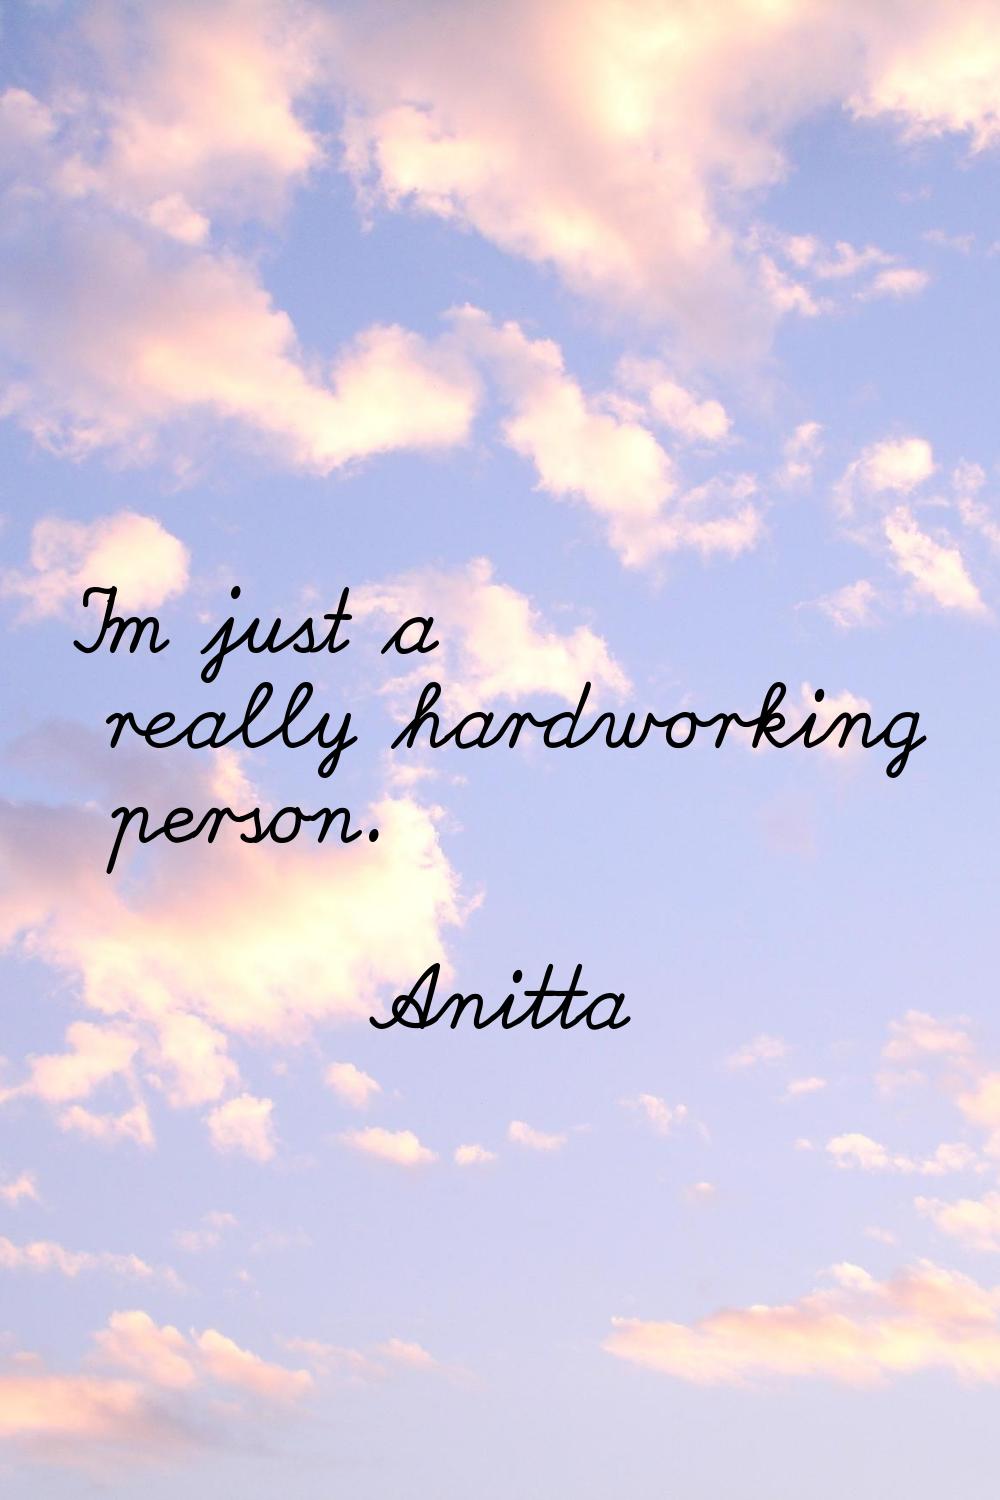 I'm just a really hardworking person.